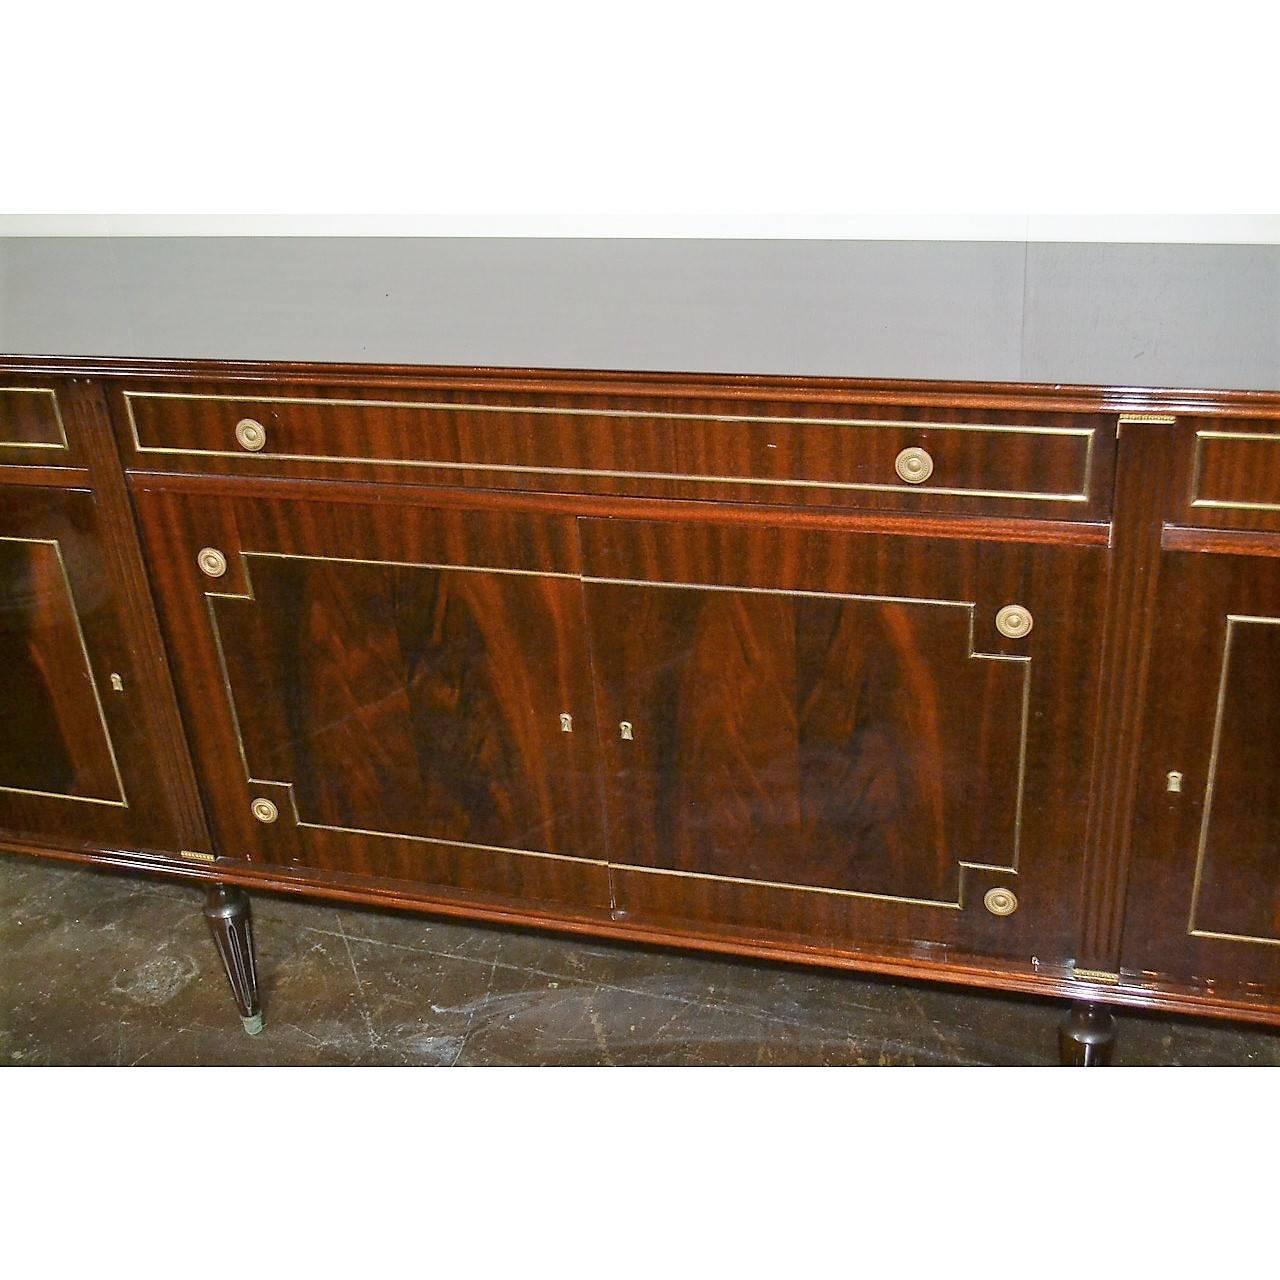 Outstanding quality and large French Jansen mahogany sideboard with superb high polish patina. The corners with fluted half columns flanking three drawers and four cupboard doors having brass accents and pulls. The whole resting on classic Louis XVI